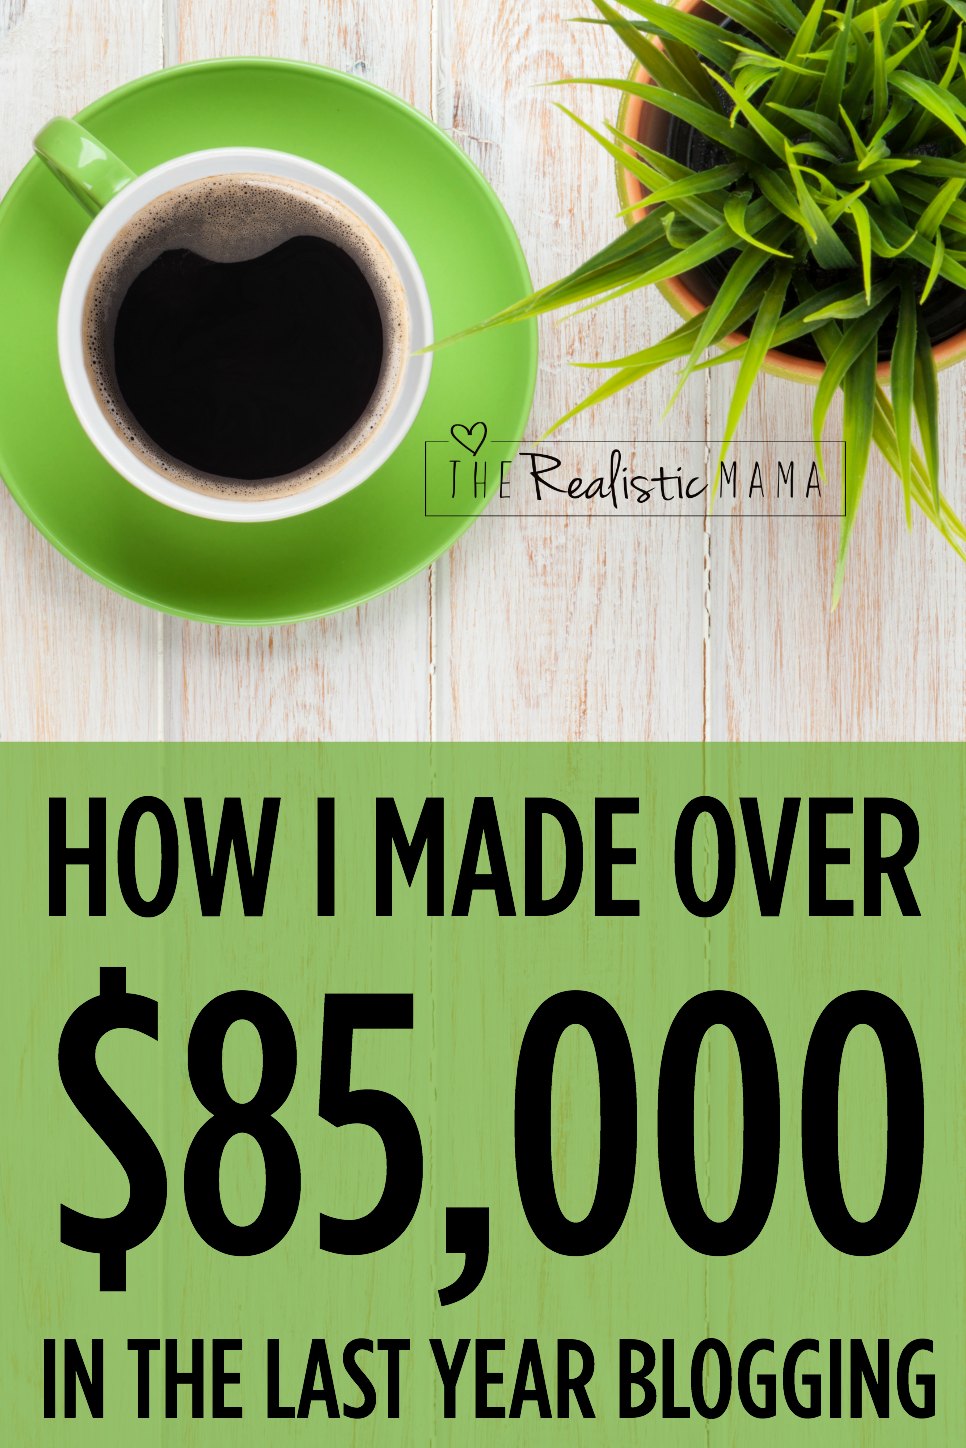 How I made over $85,000 in the last year blogging